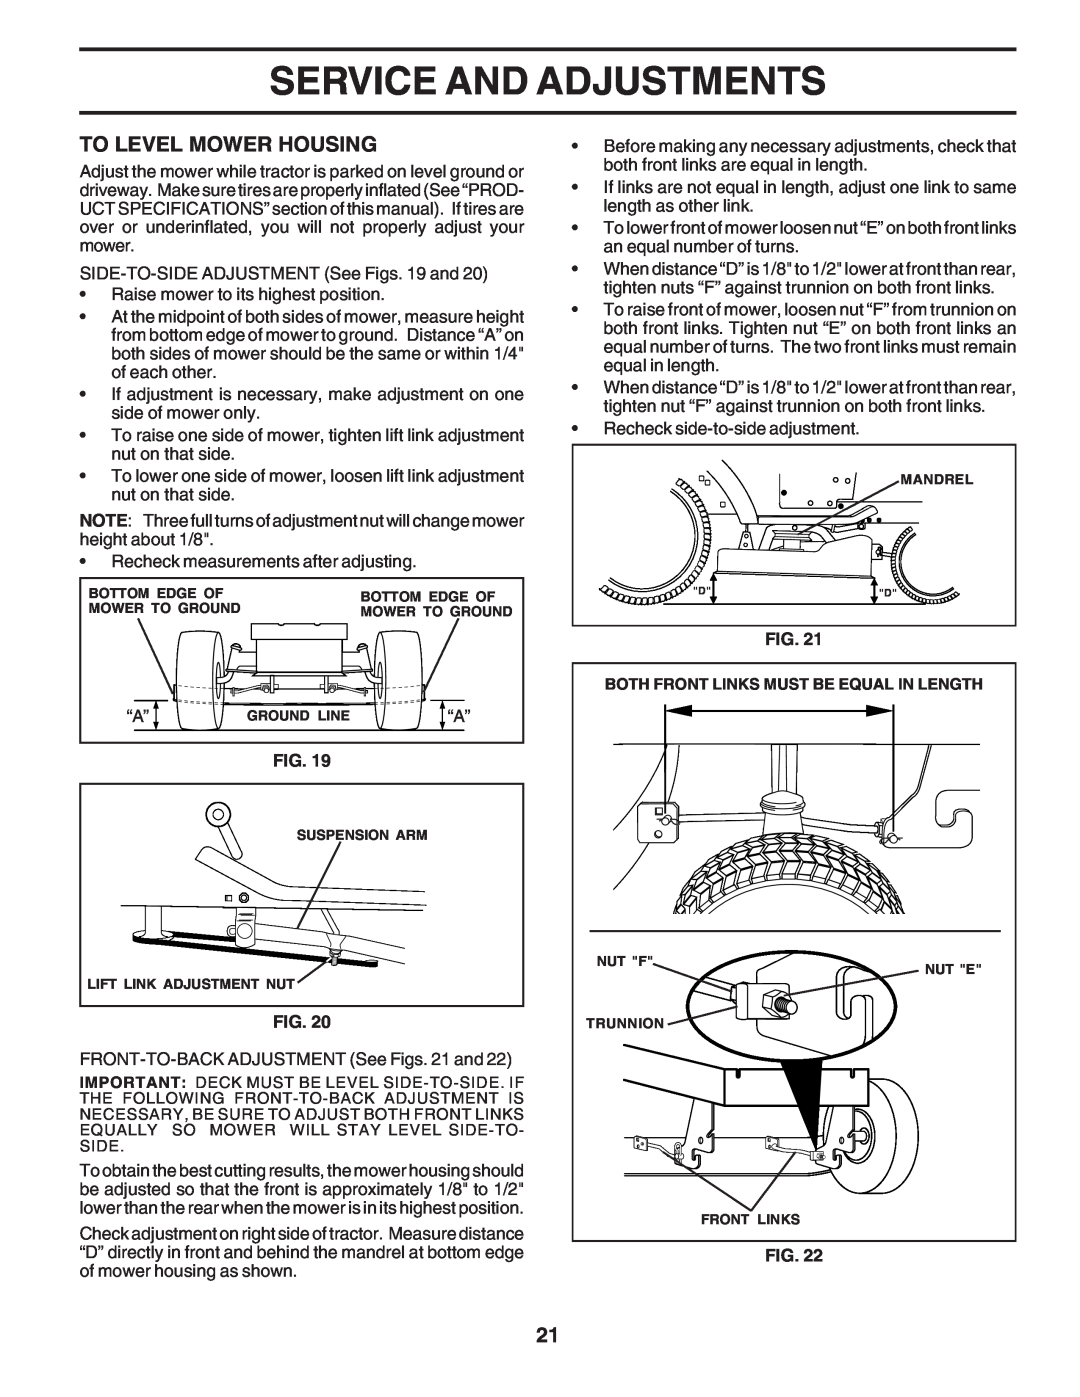 Poulan 183255 owner manual To Level Mower Housing, Service And Adjustments, Both Front Links Must Be Equal In Length 